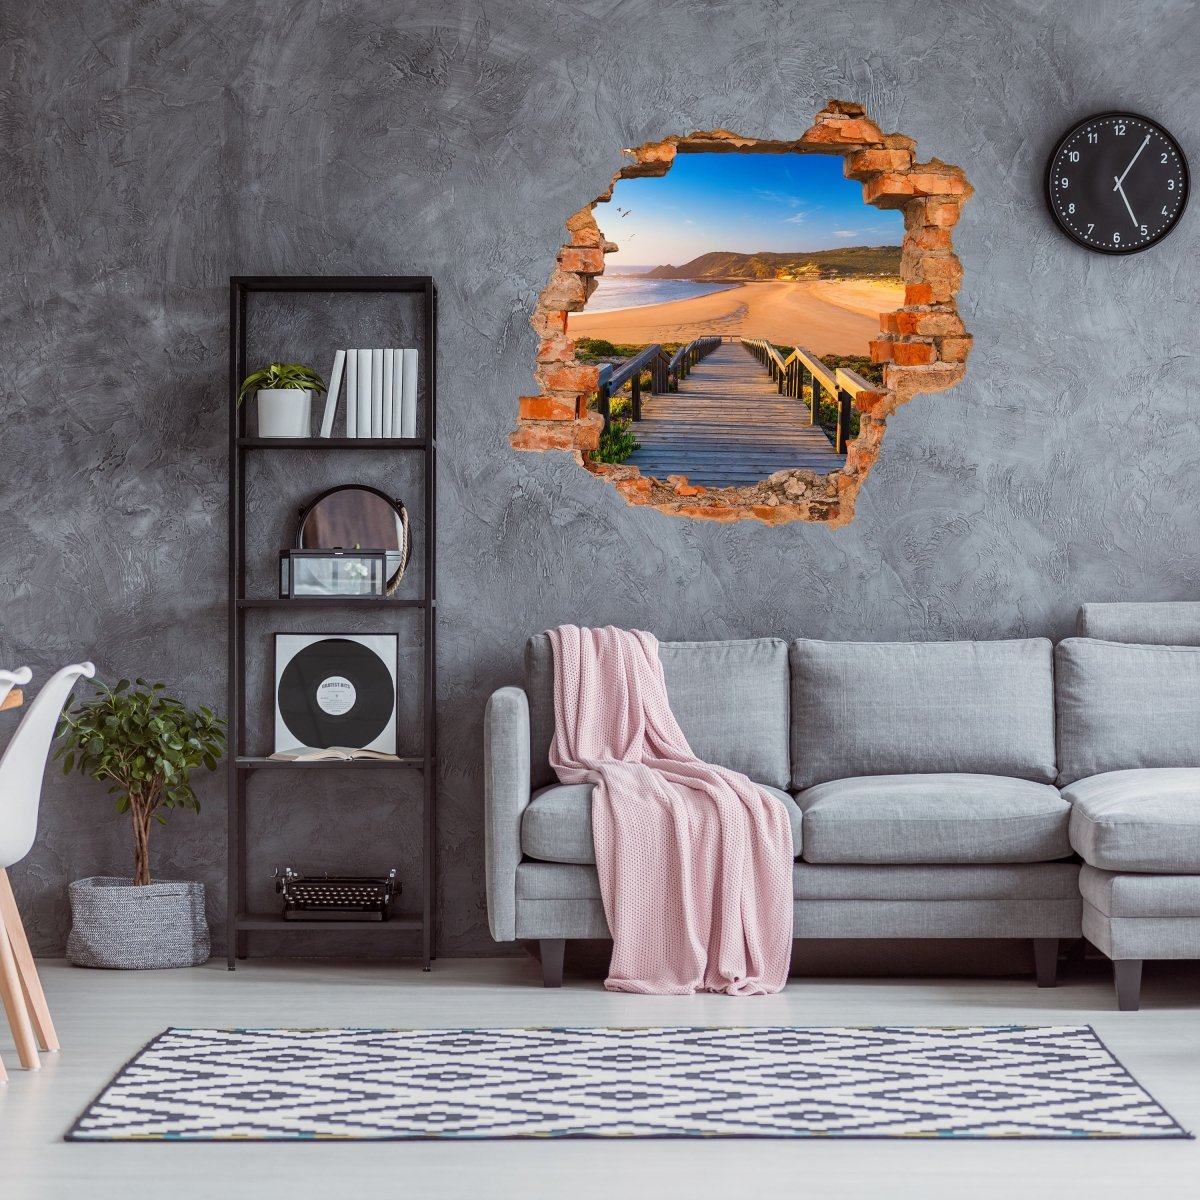 3D wall sticker stairs to the beach, seagulls, sun, sea - Wall Decal M1136